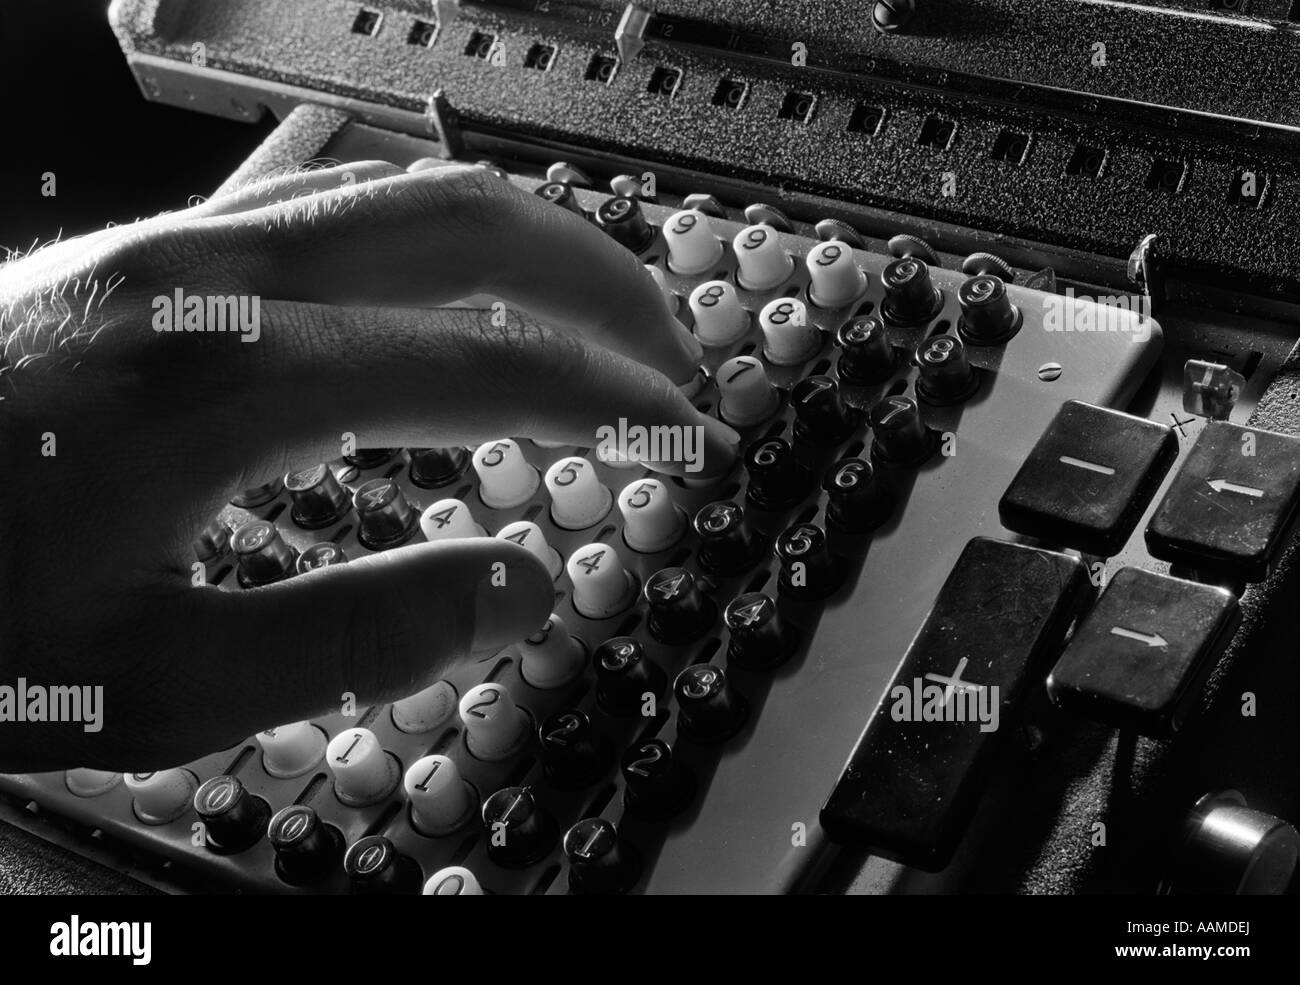 1950s MANS HAND ABOUT TO PRESS BUTTONS ON MECHANICAL ADDING MACHINE  CALCULATOR Stock Photo - Alamy